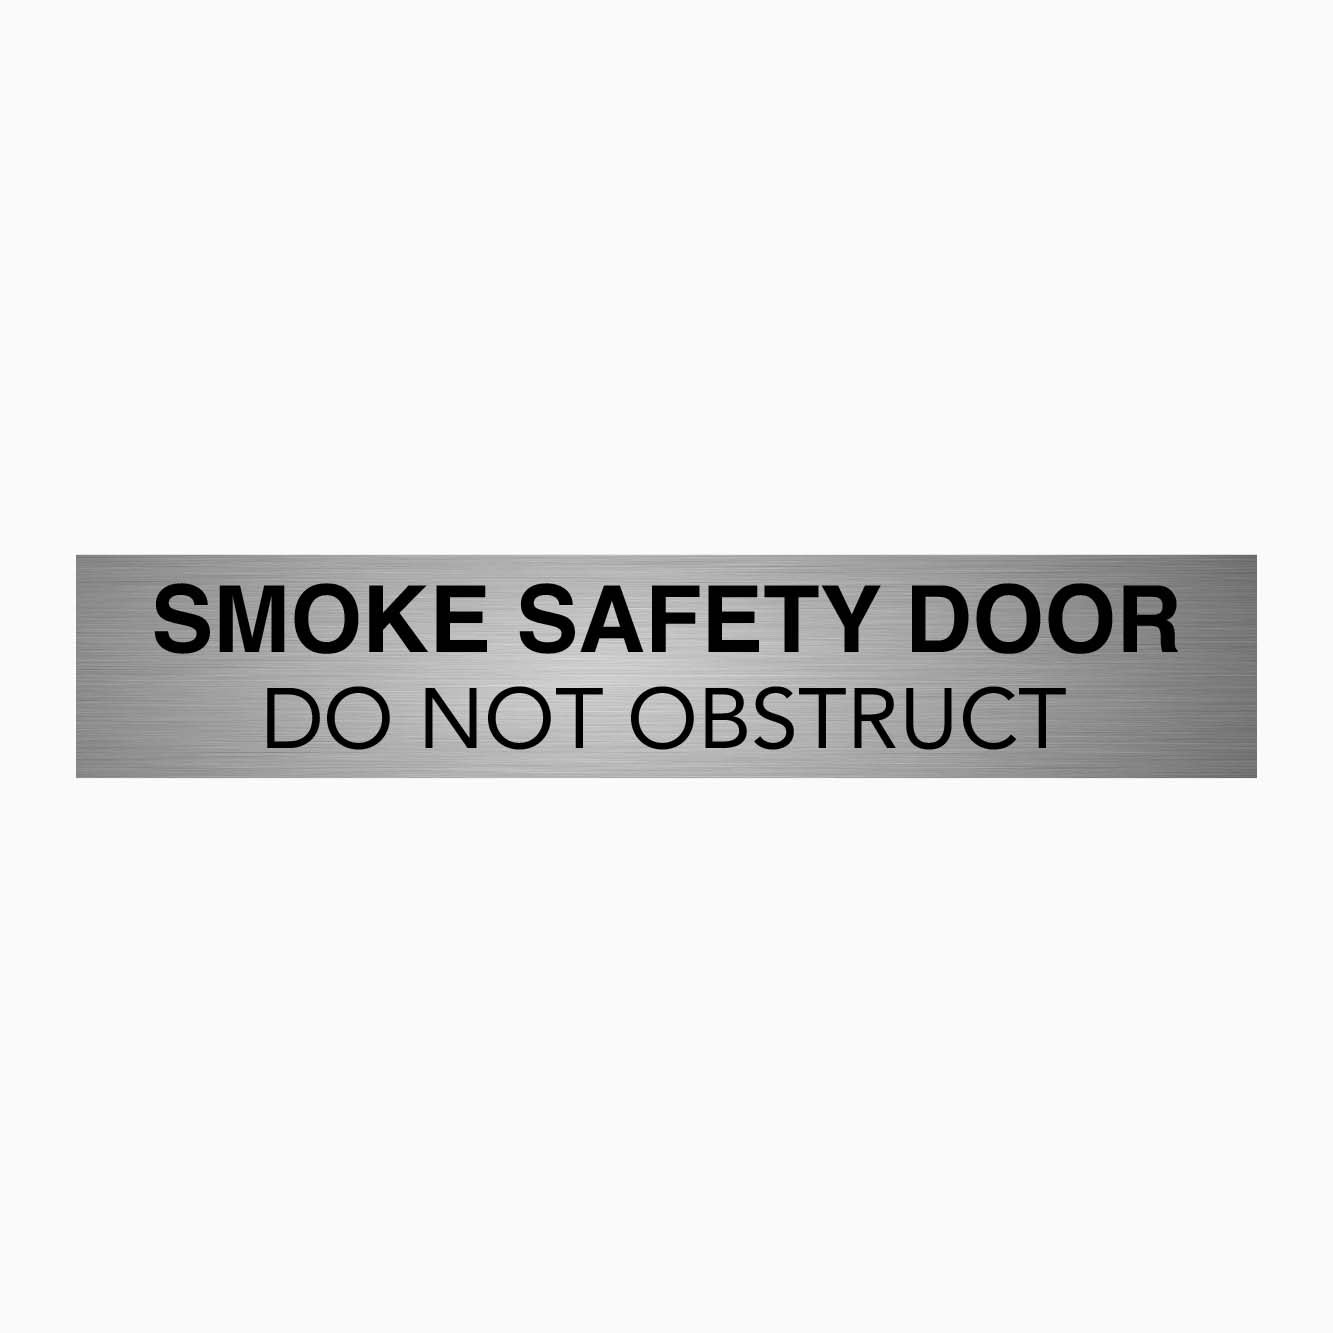 SMOKE SAFETY DOOR SIGN  DO NOT OBSTRUCT SIGN - GET SIGNS